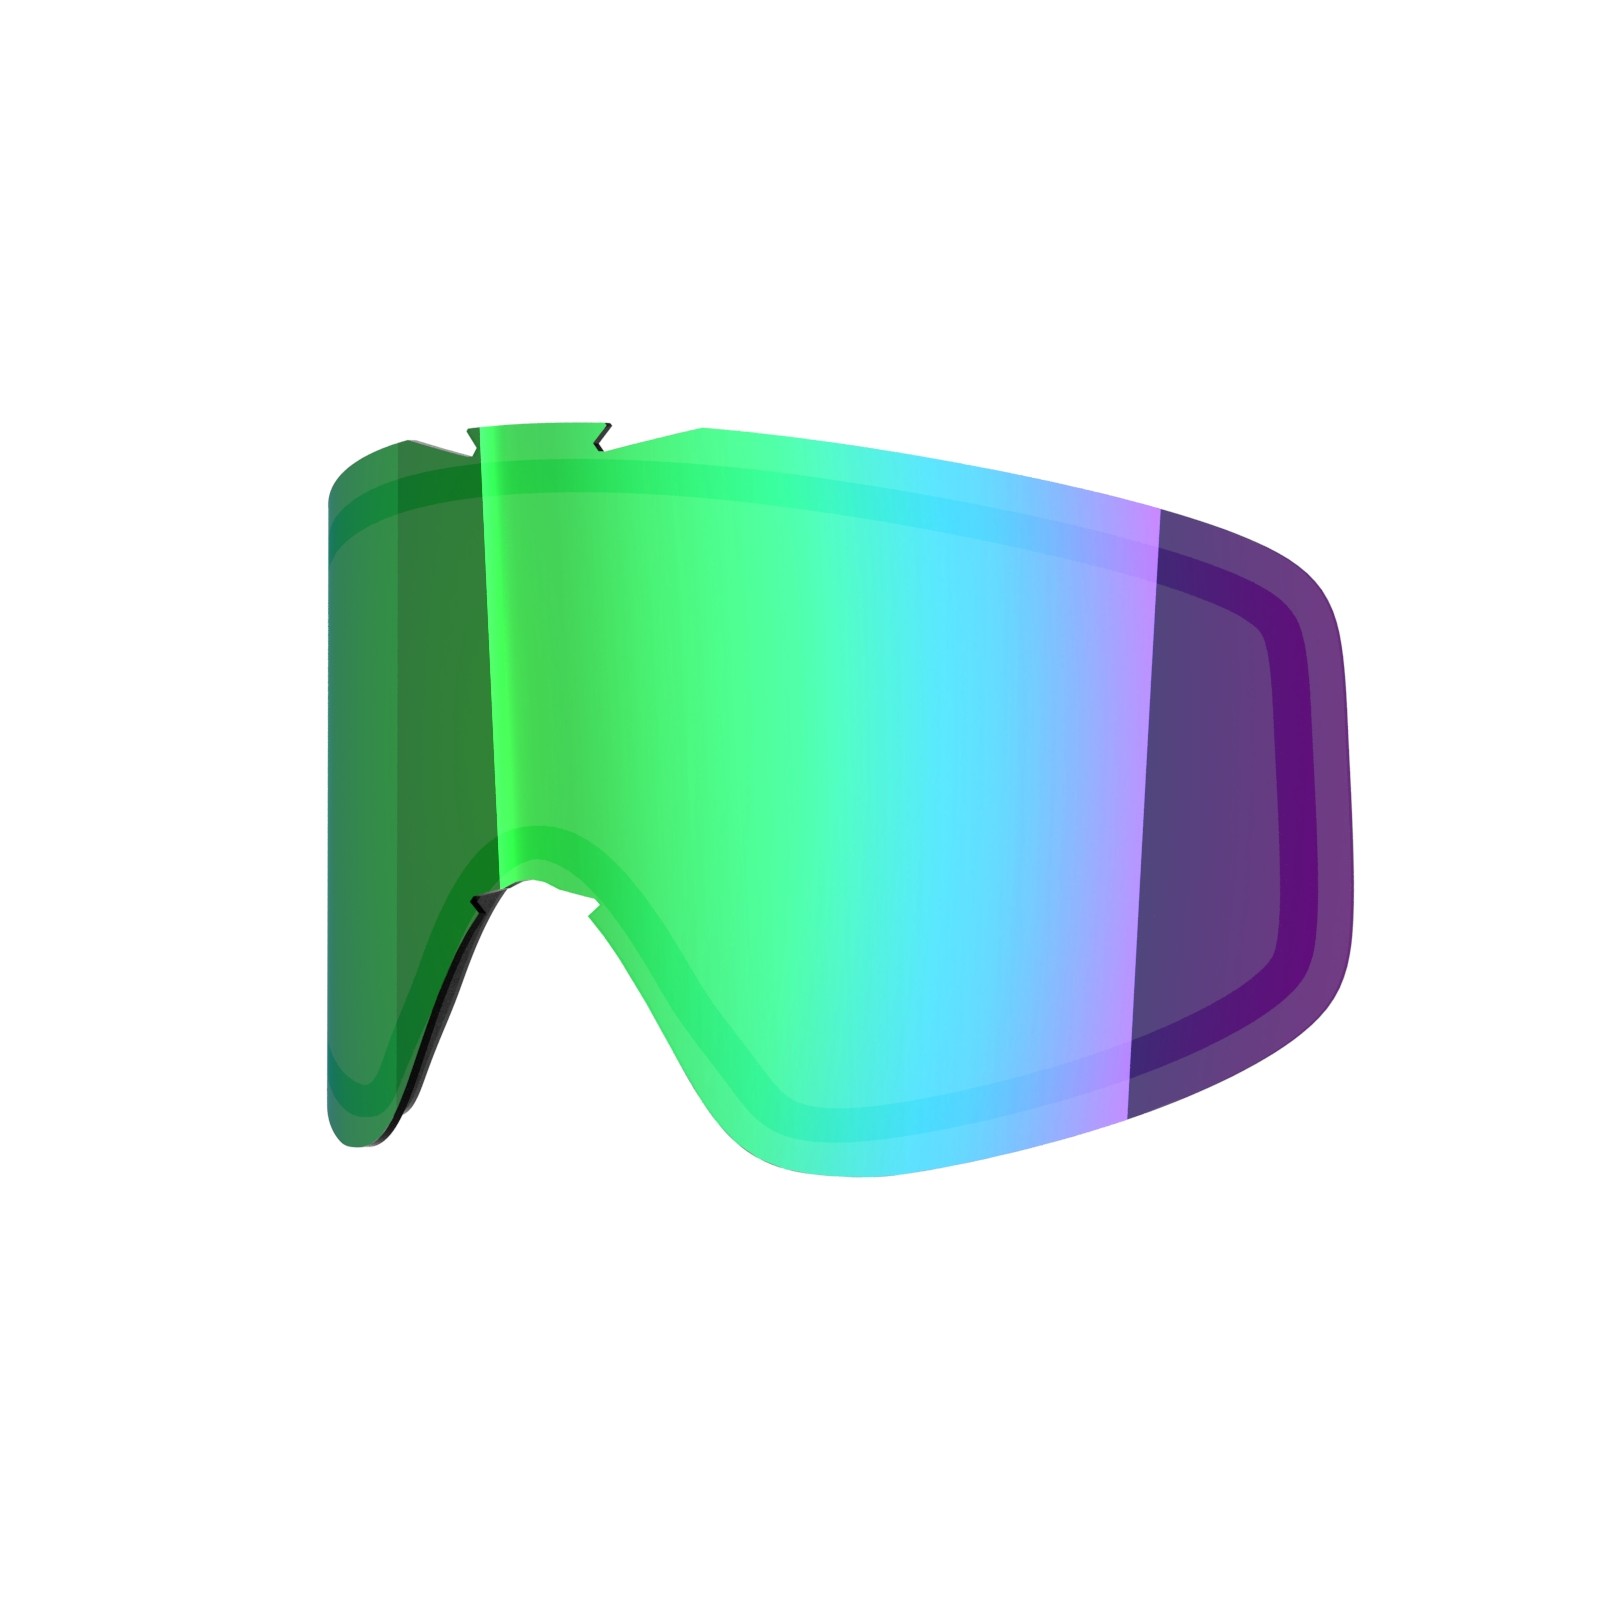 Green MCI lens for Flat goggle